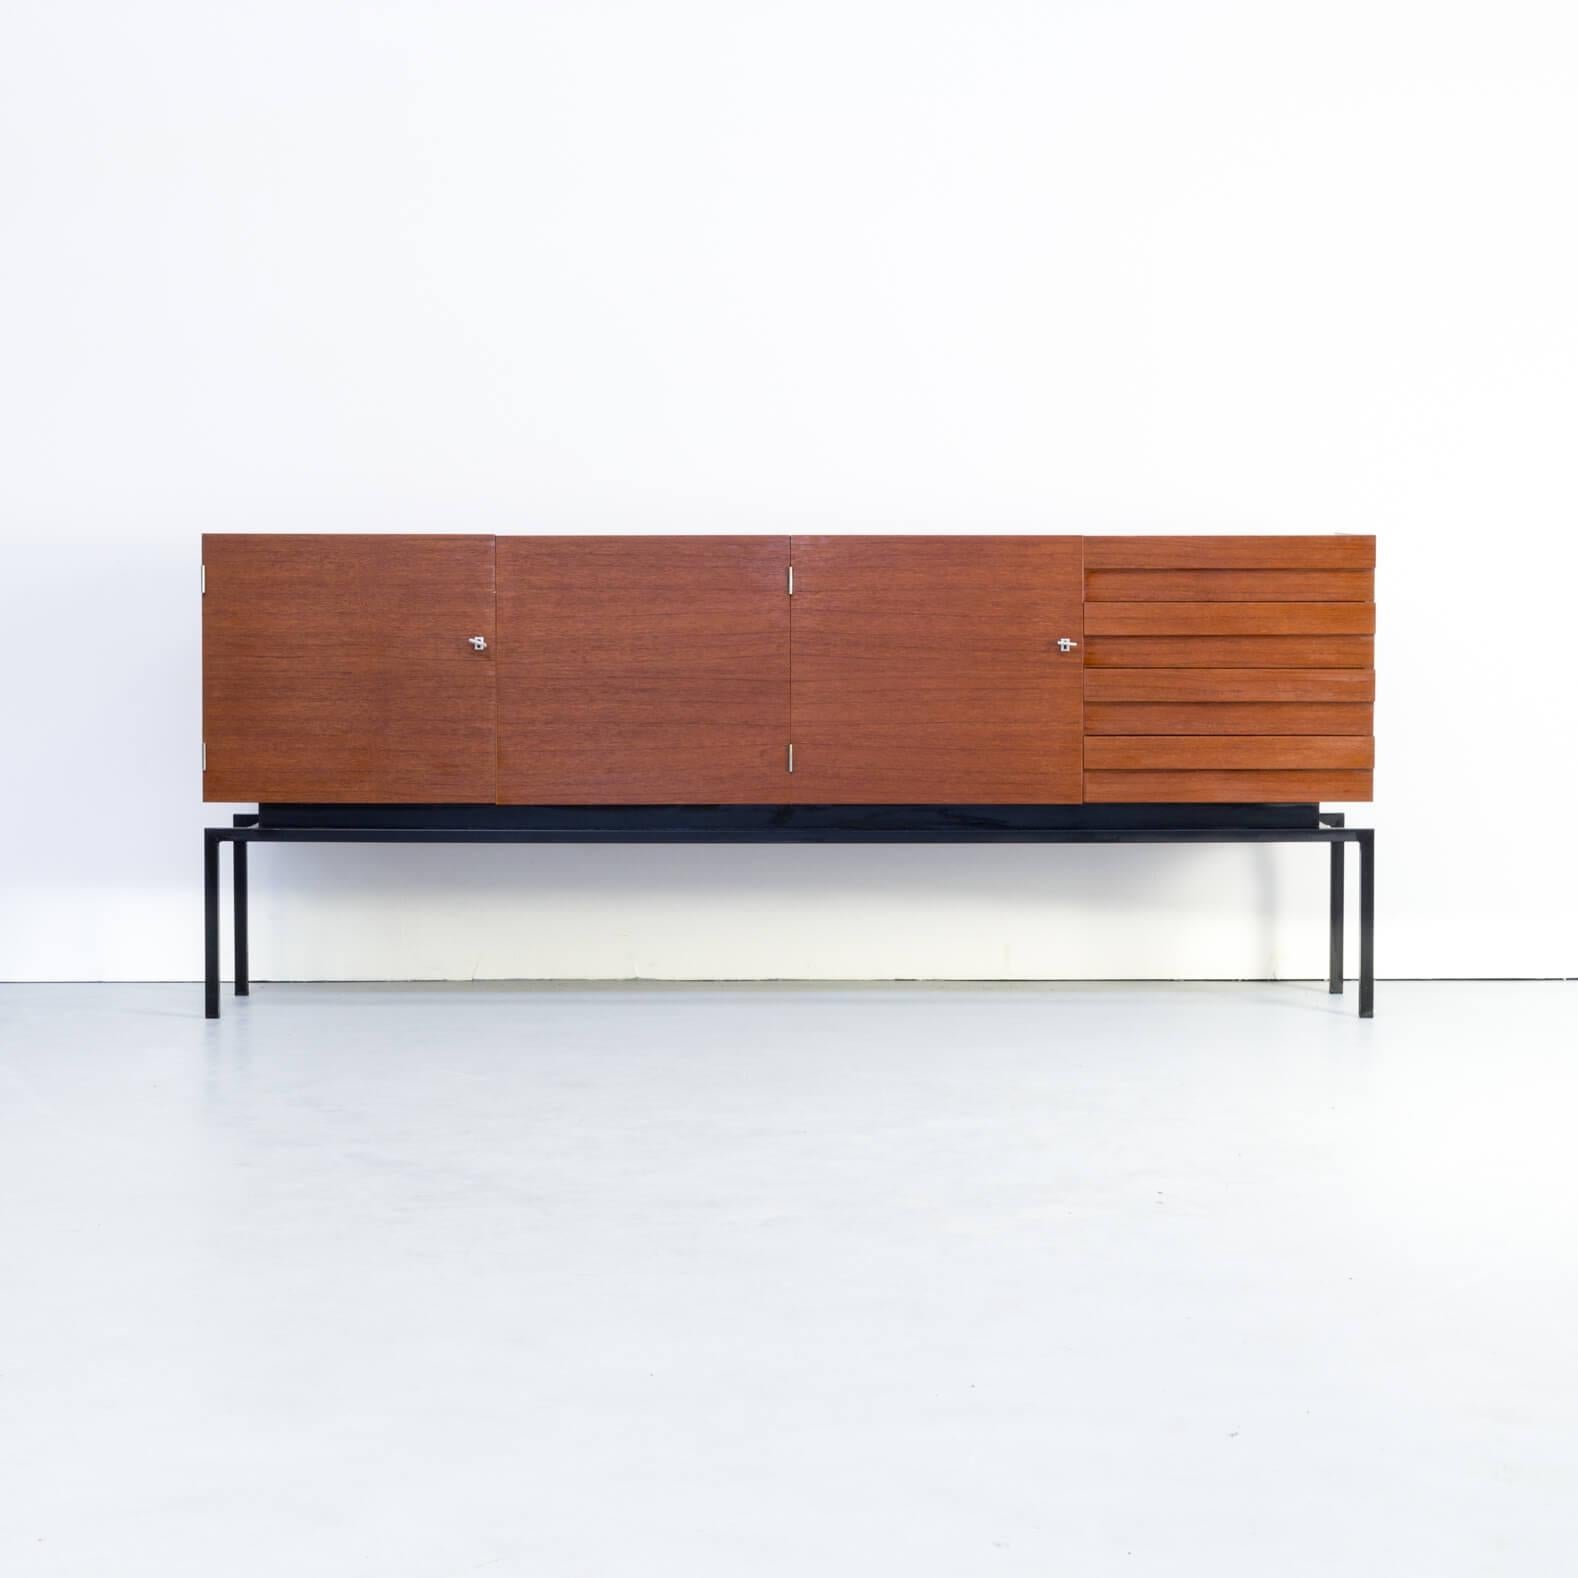 1970s Leo Bub teak sideboard for Bub Wertmöbel. This beautiful ‘floating’ sideboard has 3 doors and 4 drawers. It rests on a black lacquered metal frame and is in good condition consistent with age and use.